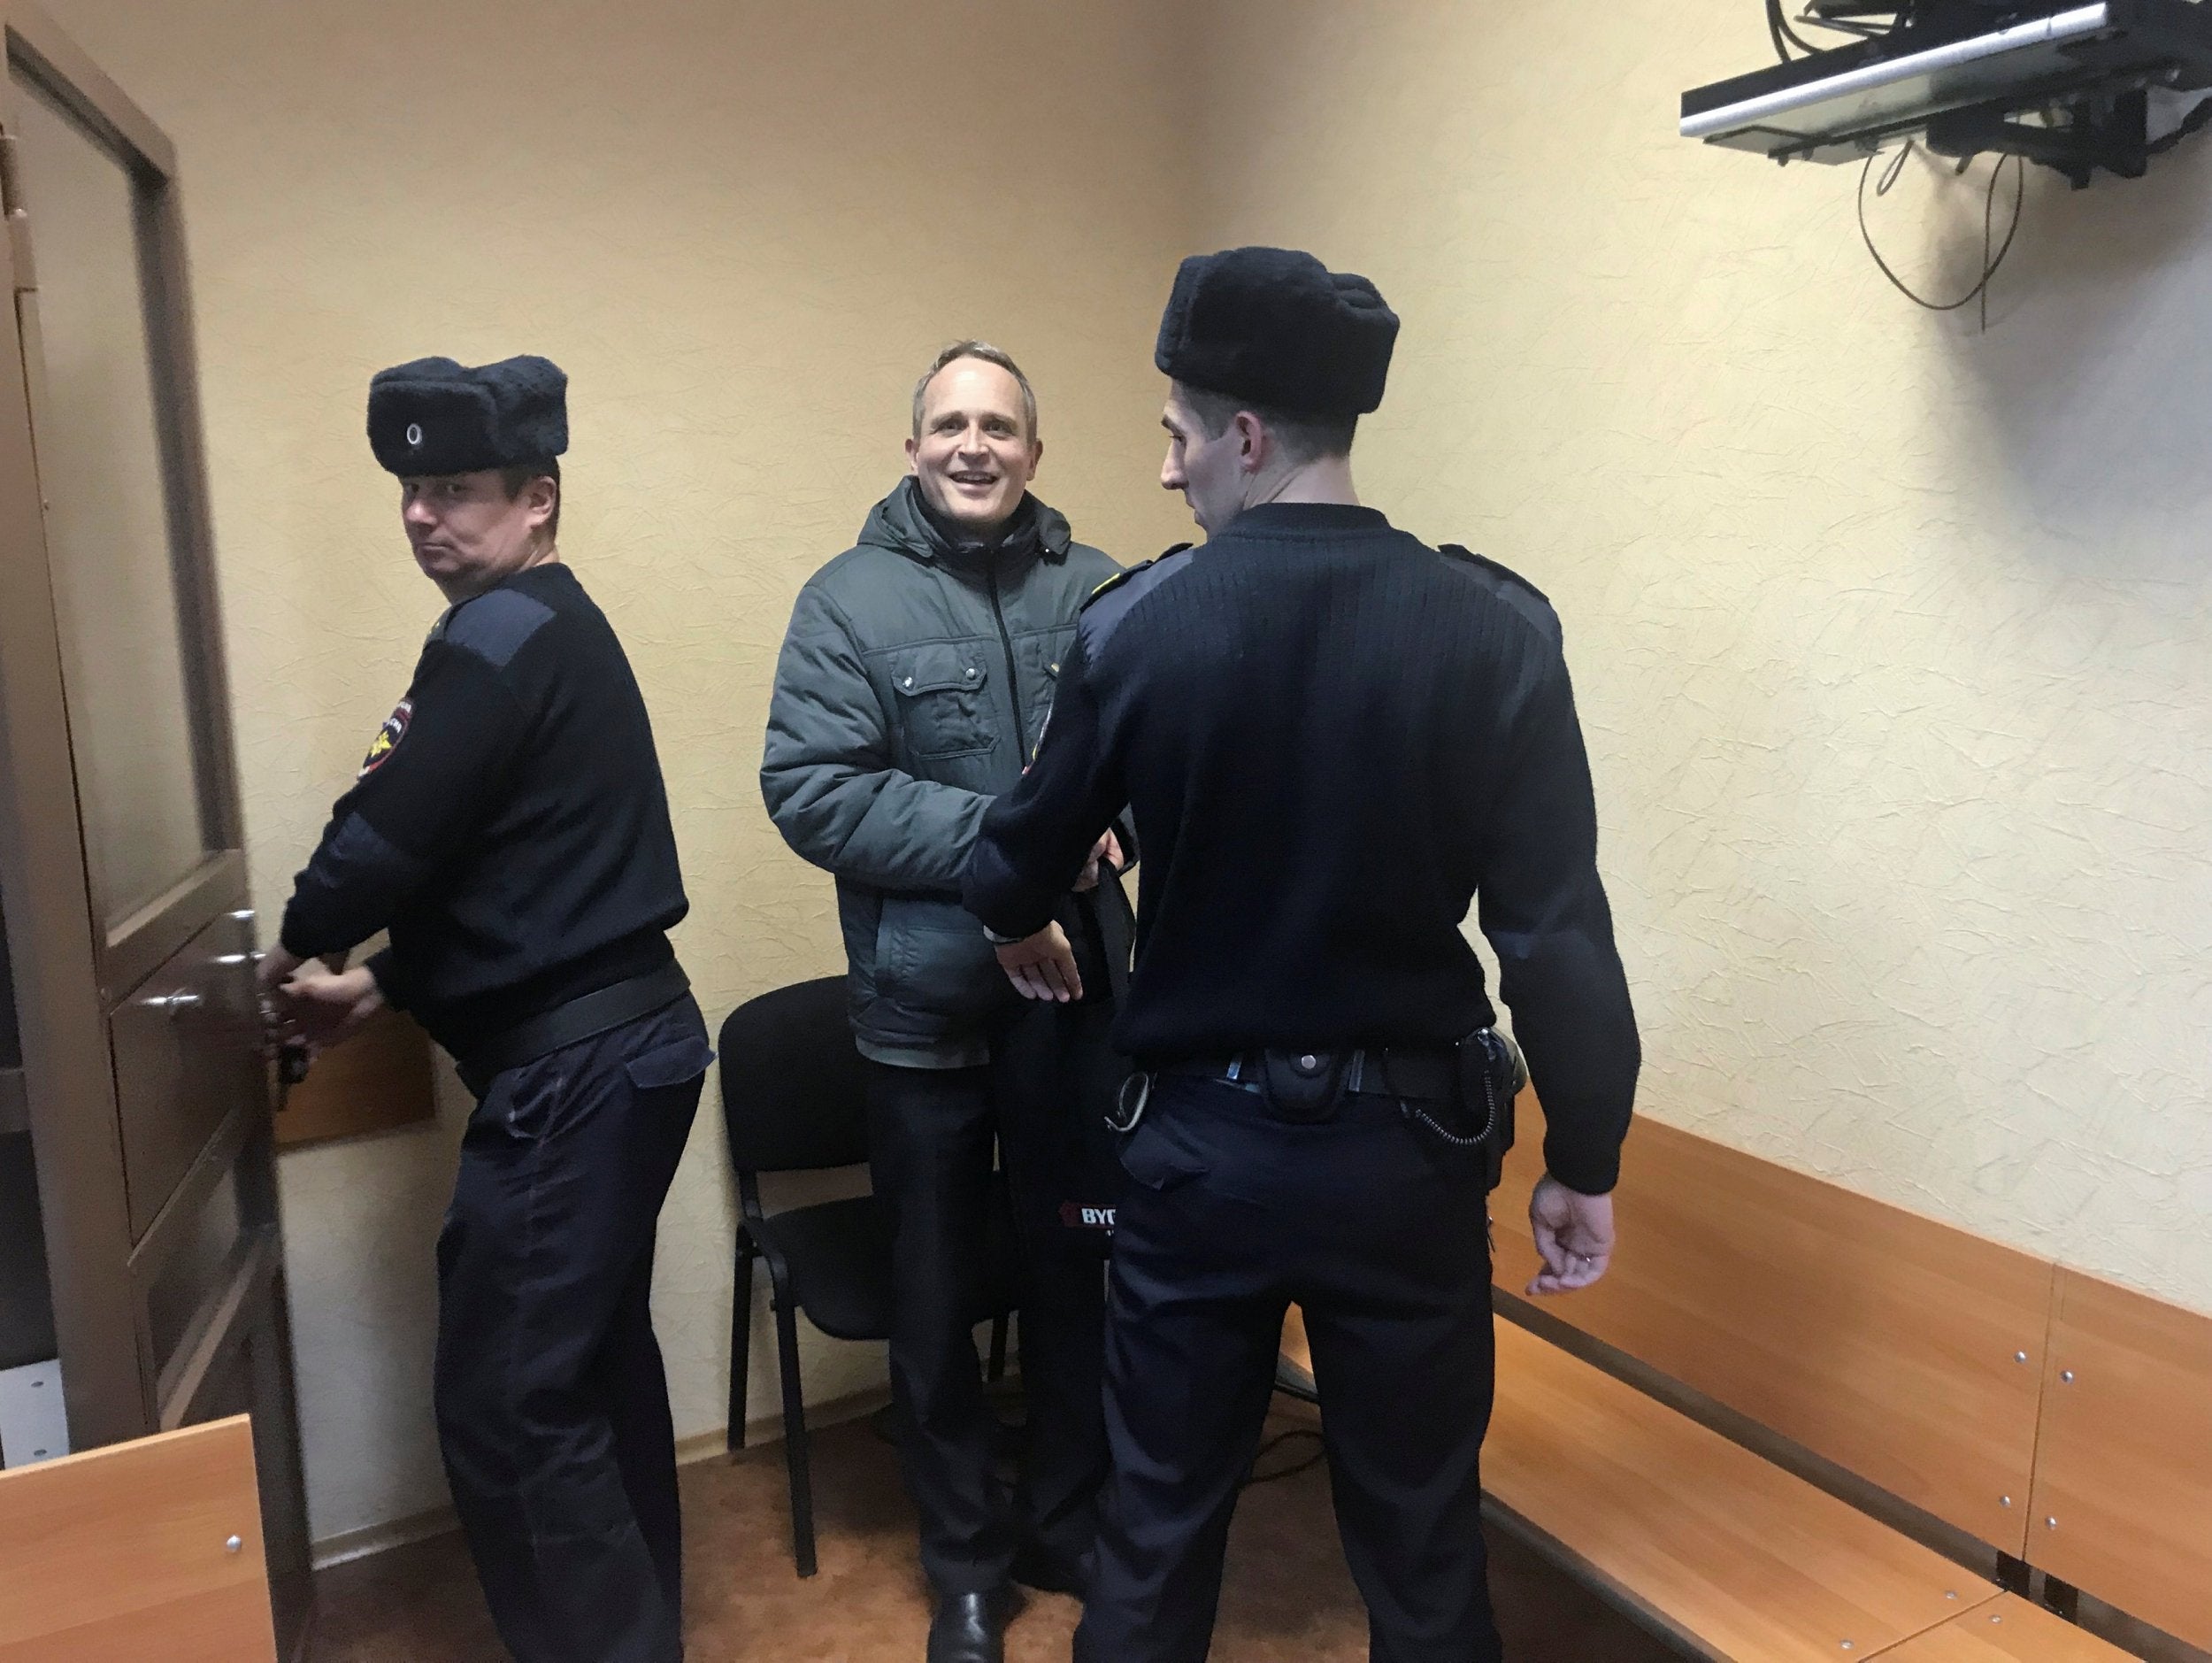 Dennis Christensen, a Jehovah's Witness accused of extremism, leaves after a court session in Oryol on 14 January